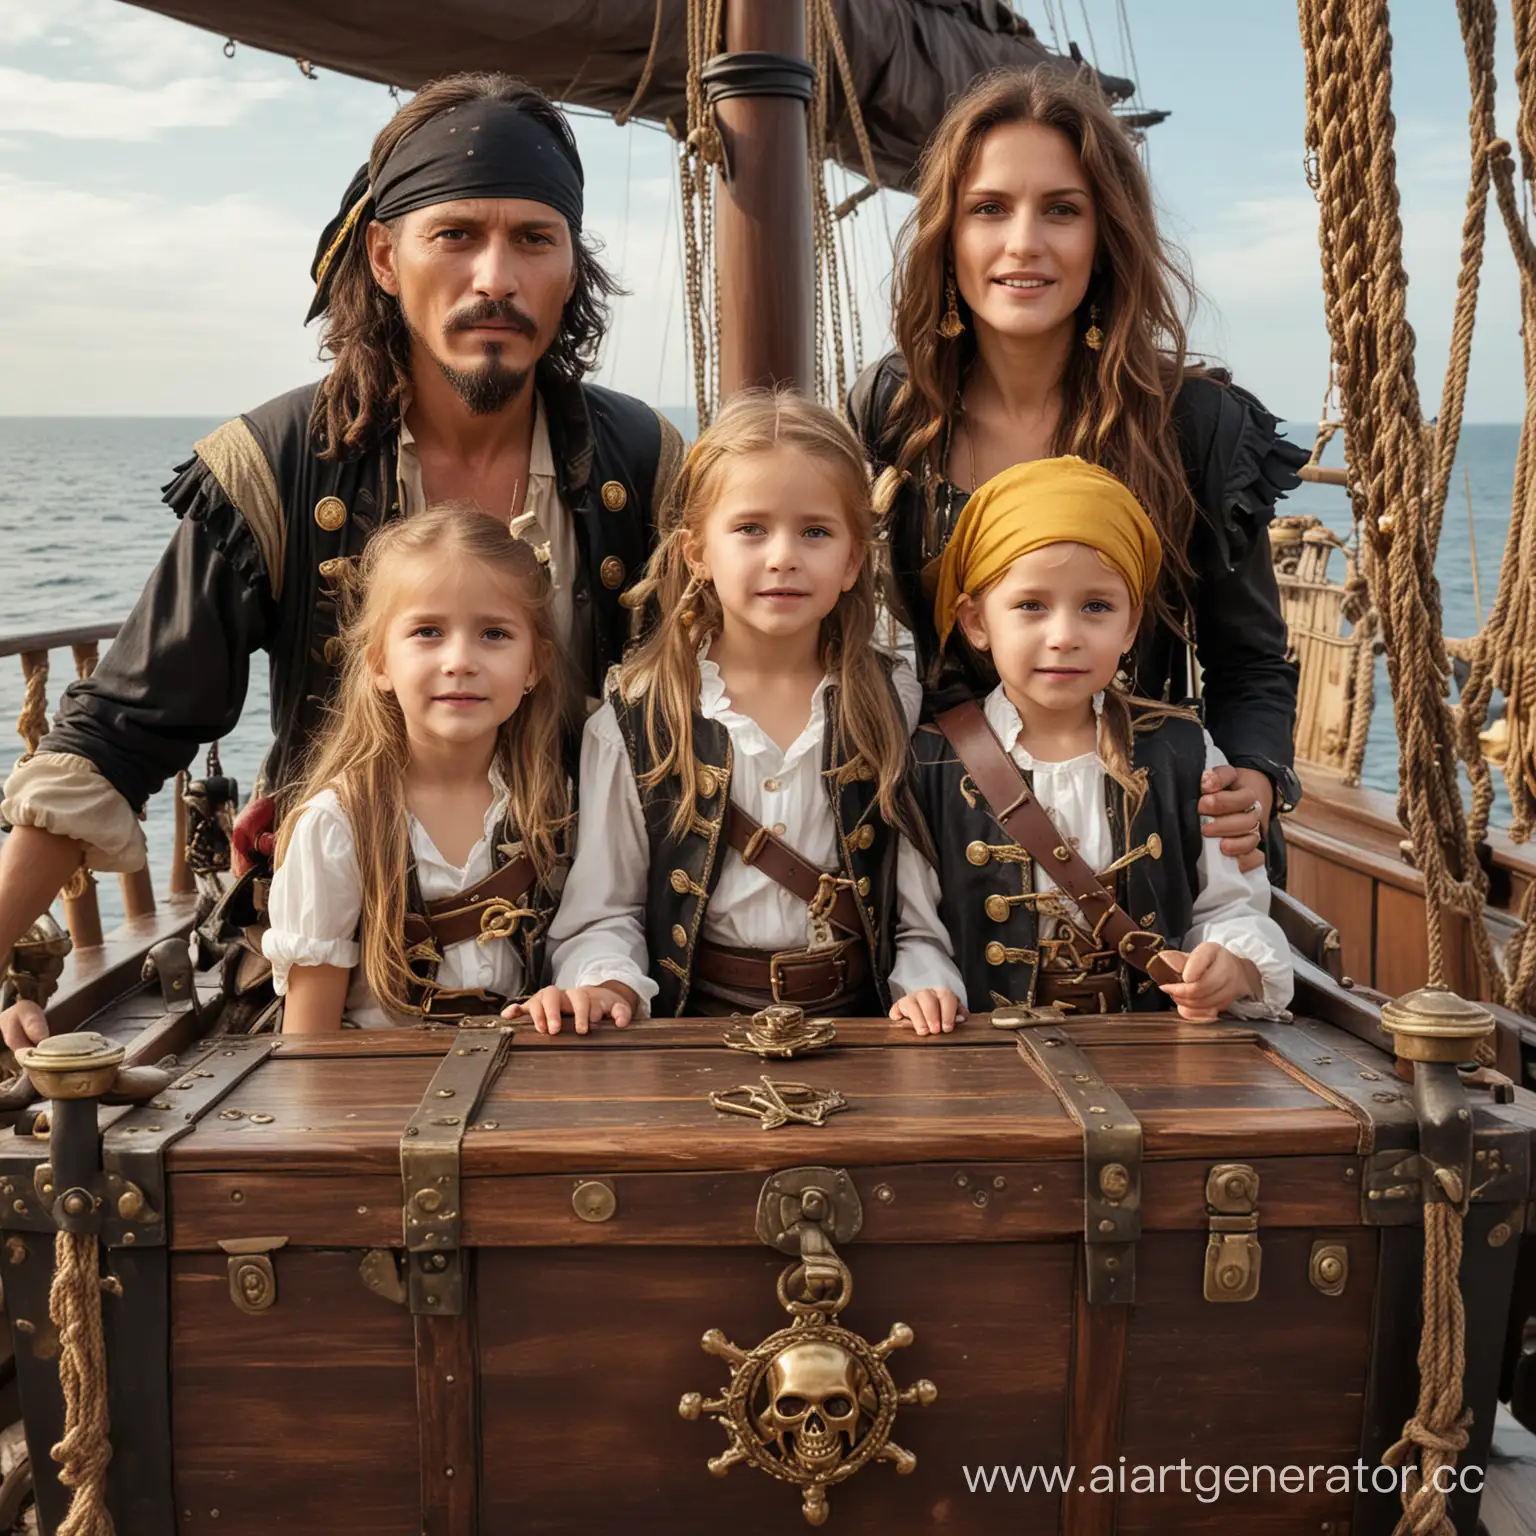 Pirate-Family-Treasure-Hunt-Adventurous-Scene-with-Parents-and-Children-on-Ship